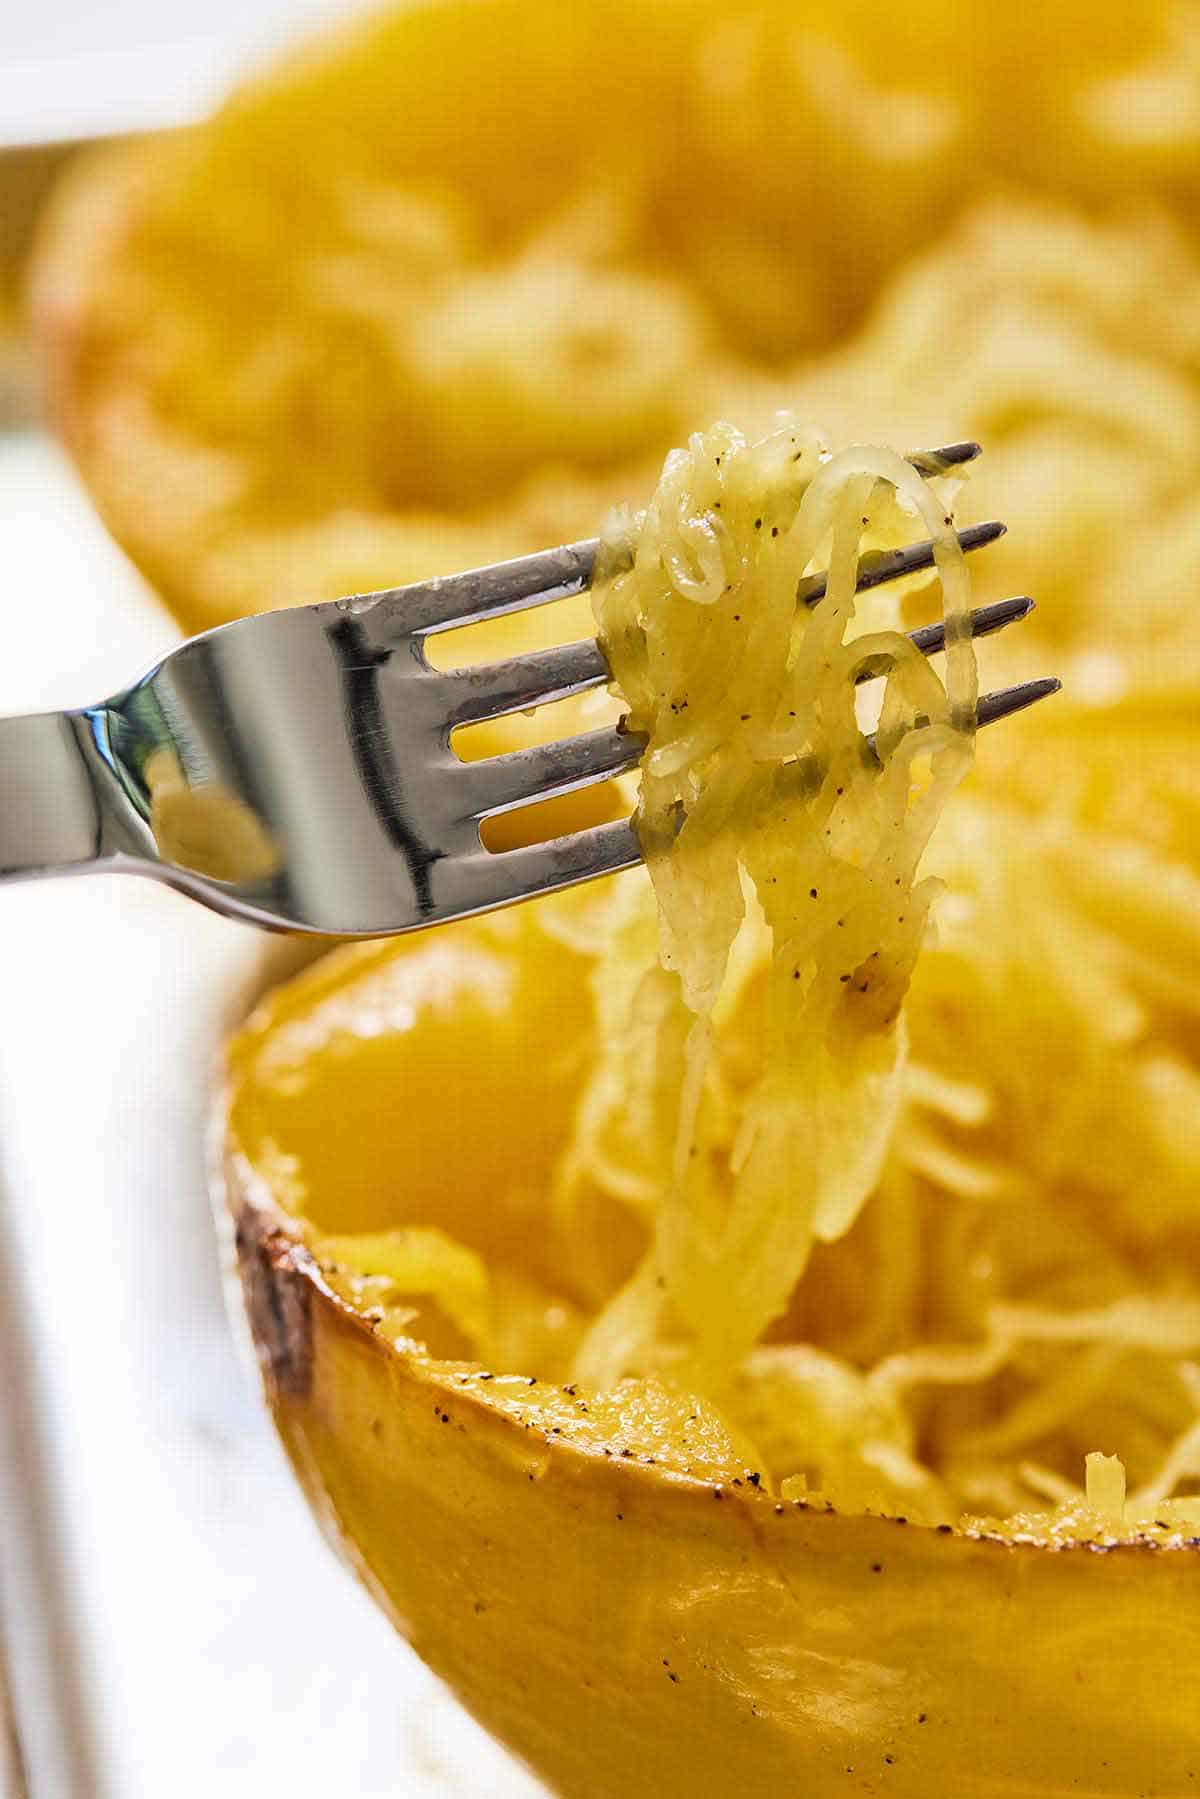 A fork holding up the strands of spaghetti squash.